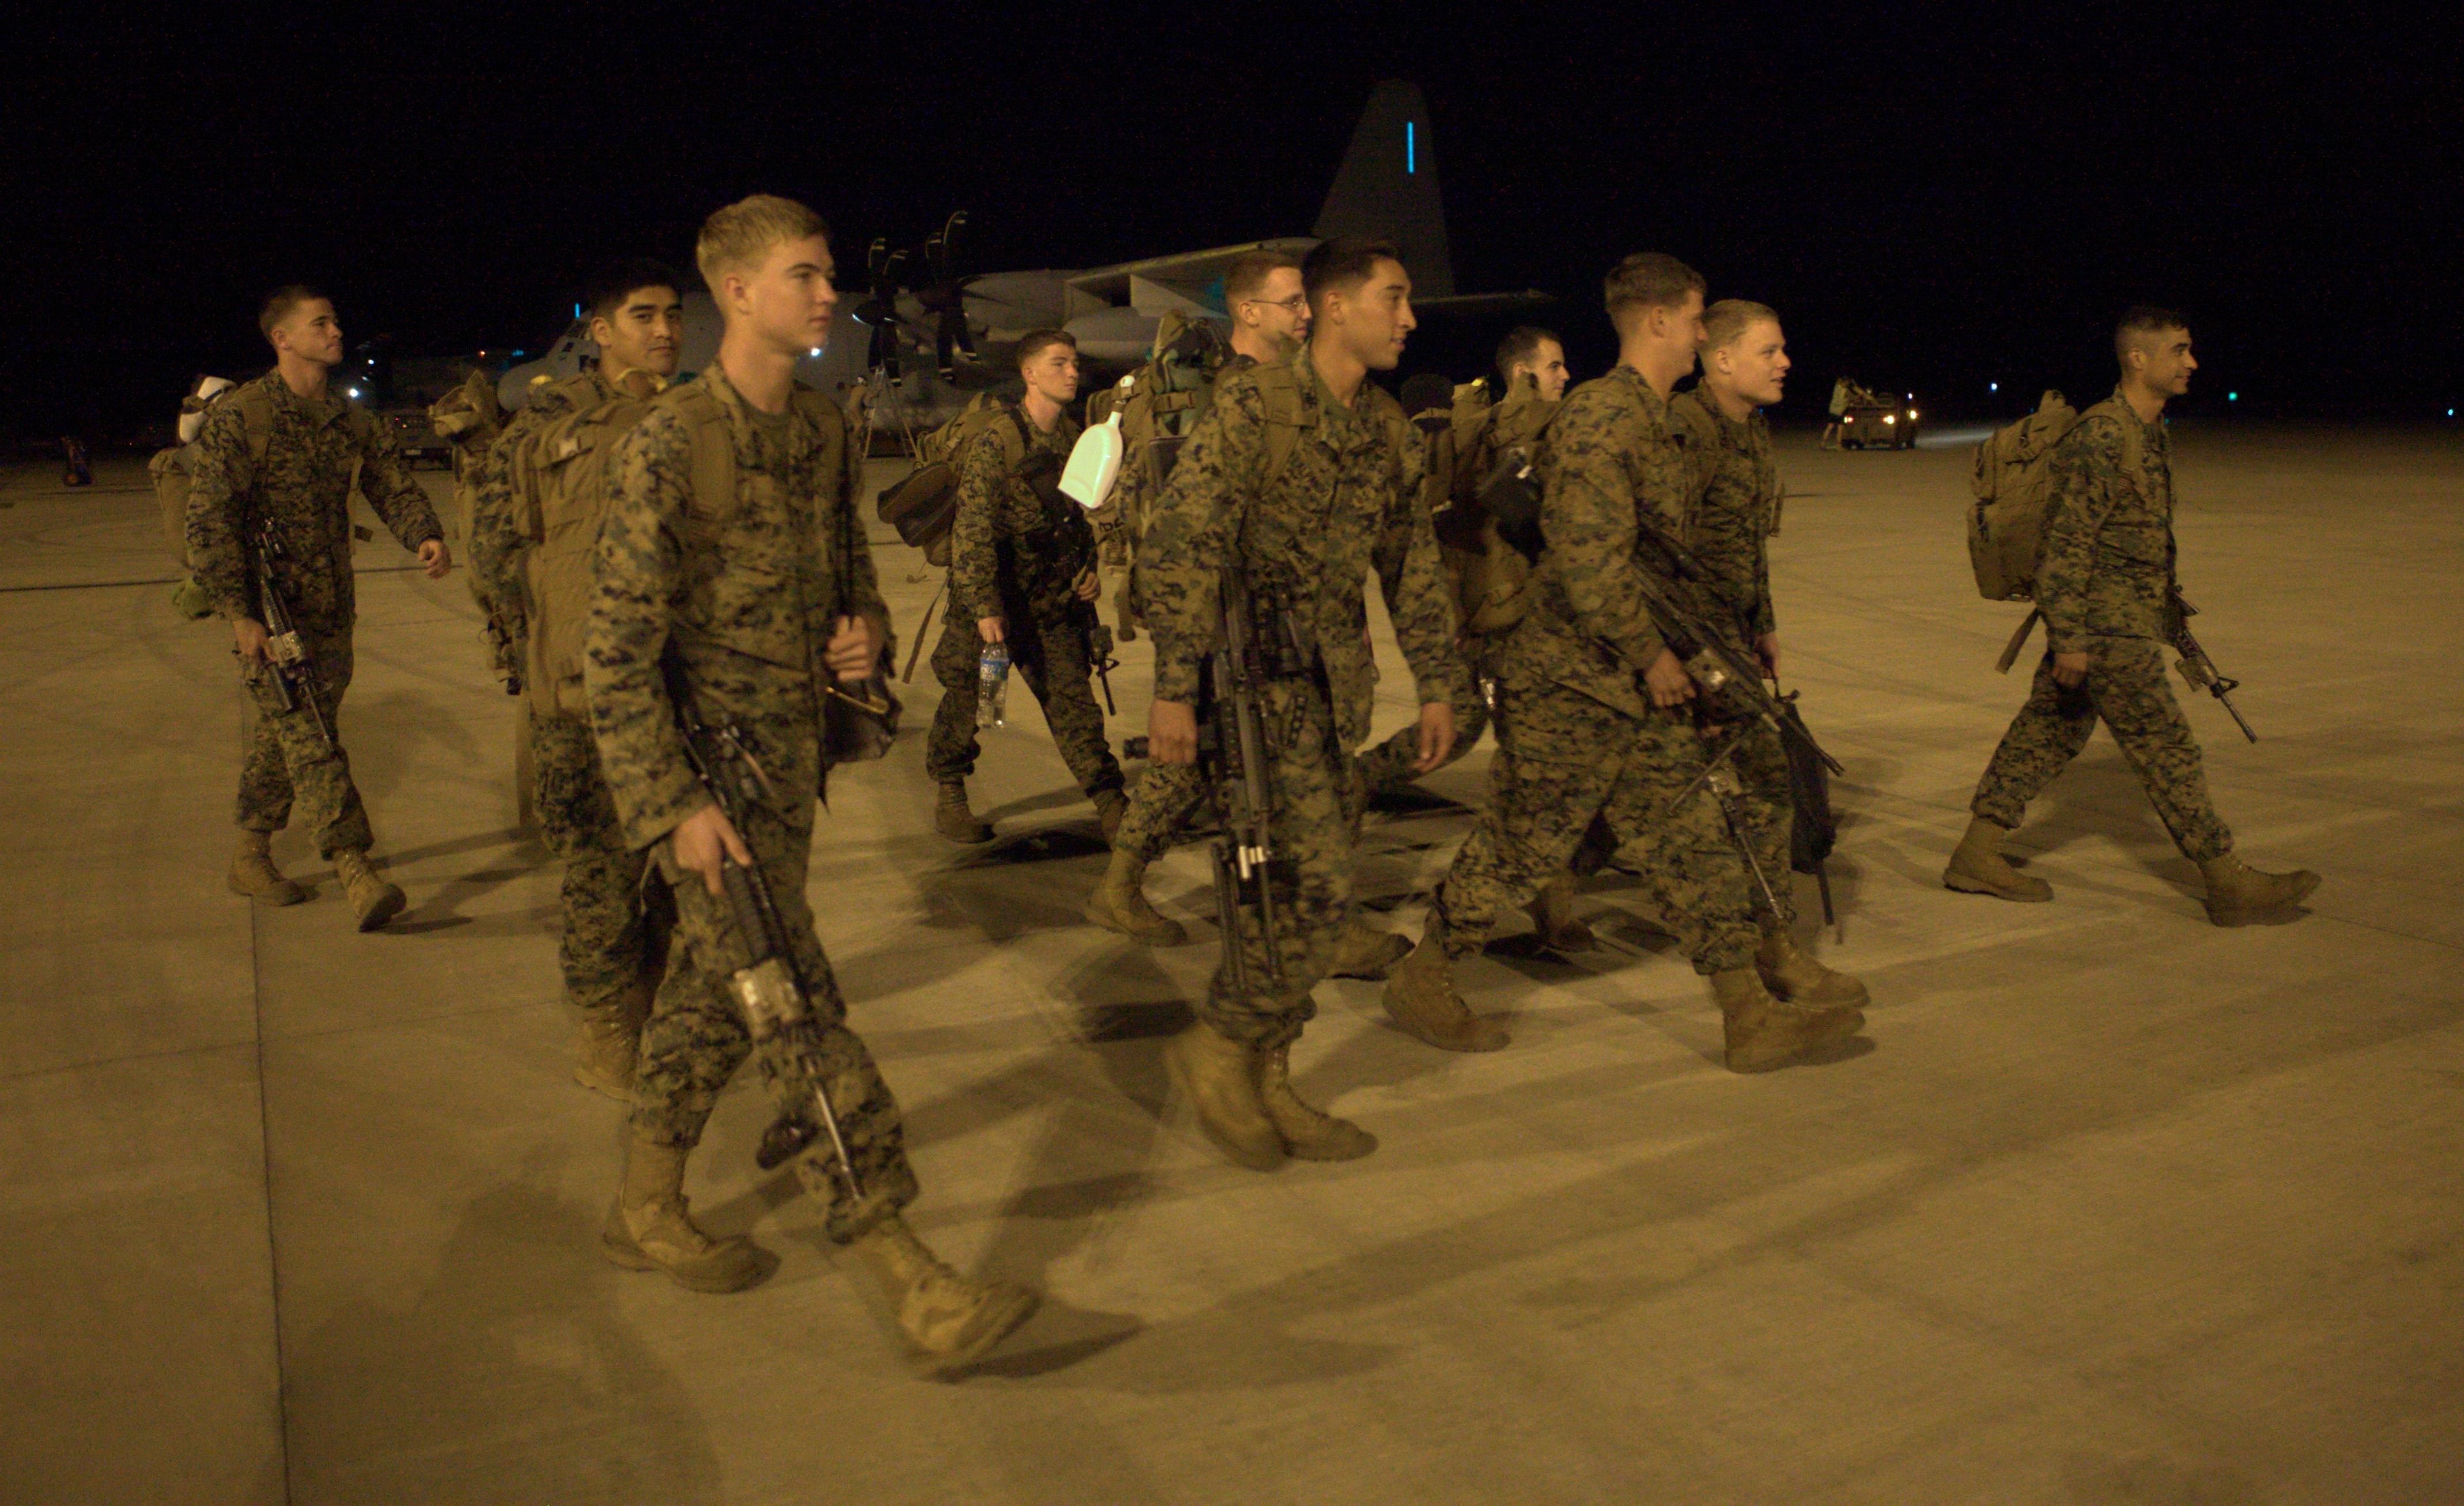 U.S. Marines with Company F, 2nd Battalion, 3rd Marine Regiment, 3rd Marine Division, III Marine Expeditionary Force, walk across the tarmac at Royal Australian Air Force Base Darwin after returning to Australia June 26. During the remaining months of its deployment in Darwin, the Marine rotational force will conduct bilateral martial arts training, small unit operations, and other combat training with various supporting elements, all in close cooperation with the Australian Army’s 1st Brigade, based at Robertson Barracks.